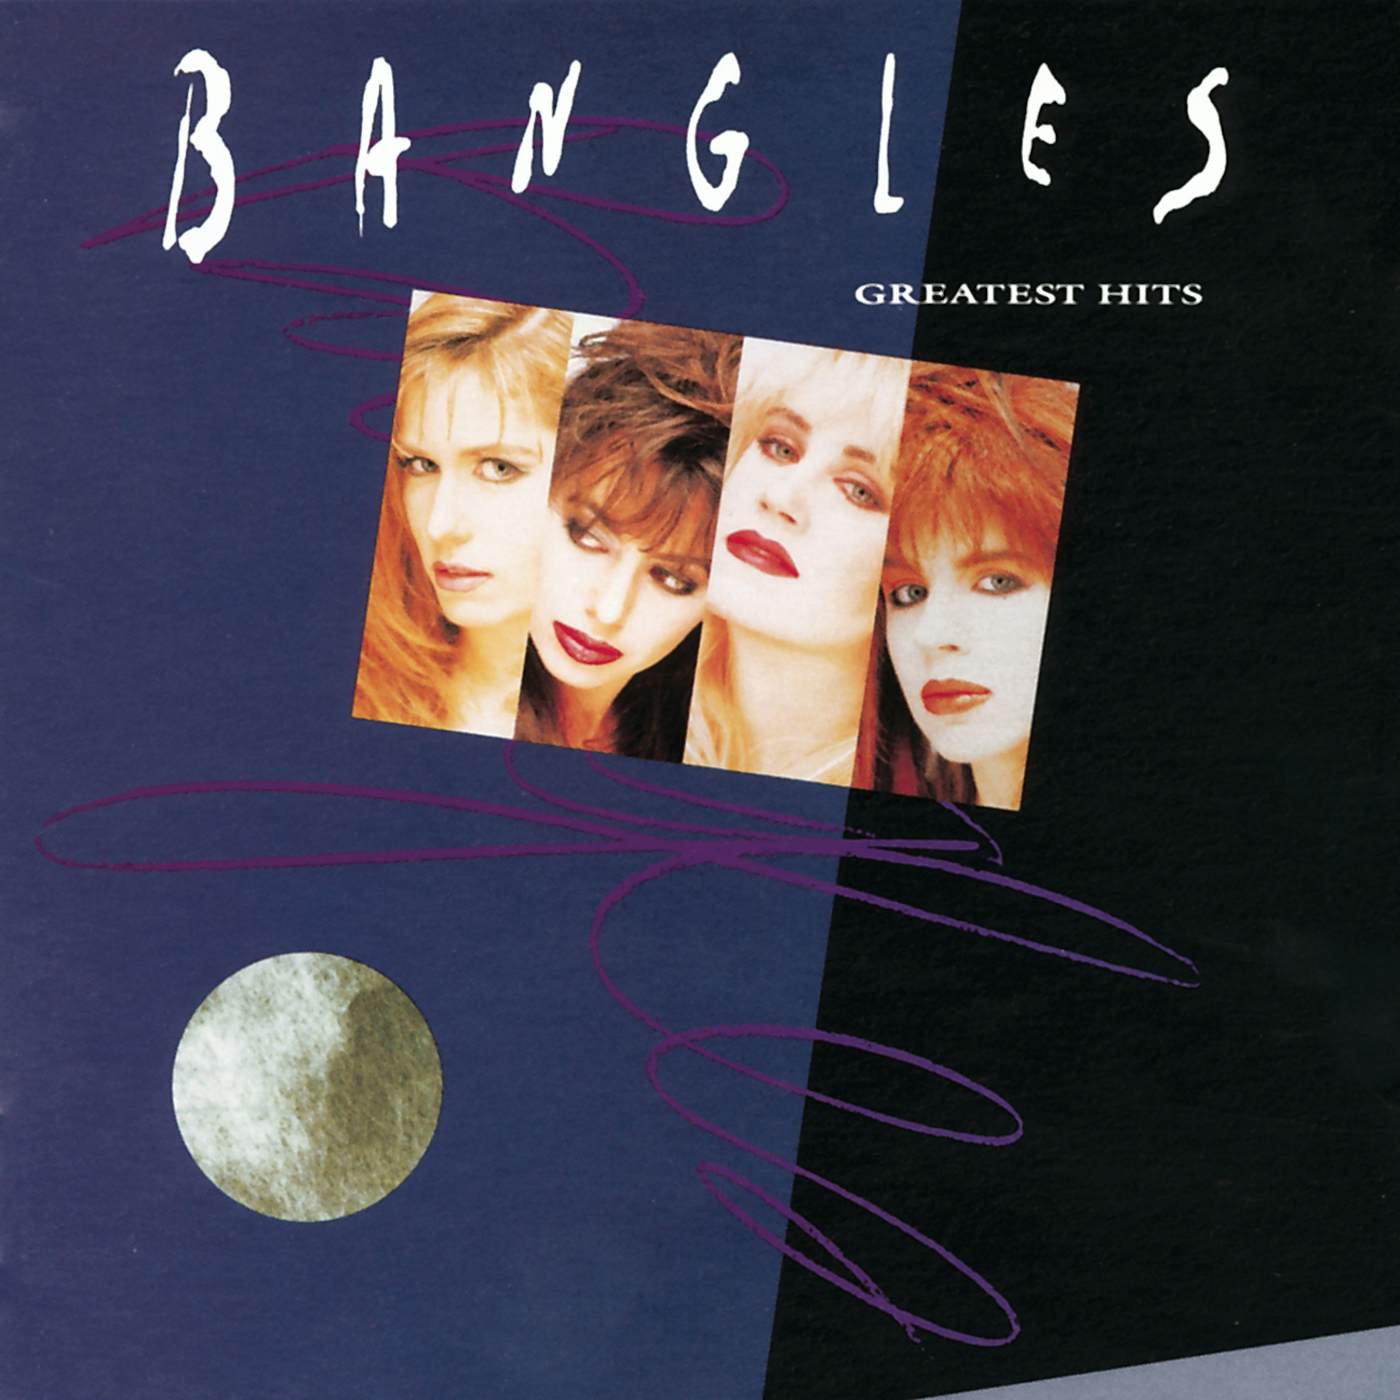 The Bangles' GREATEST HITS CD